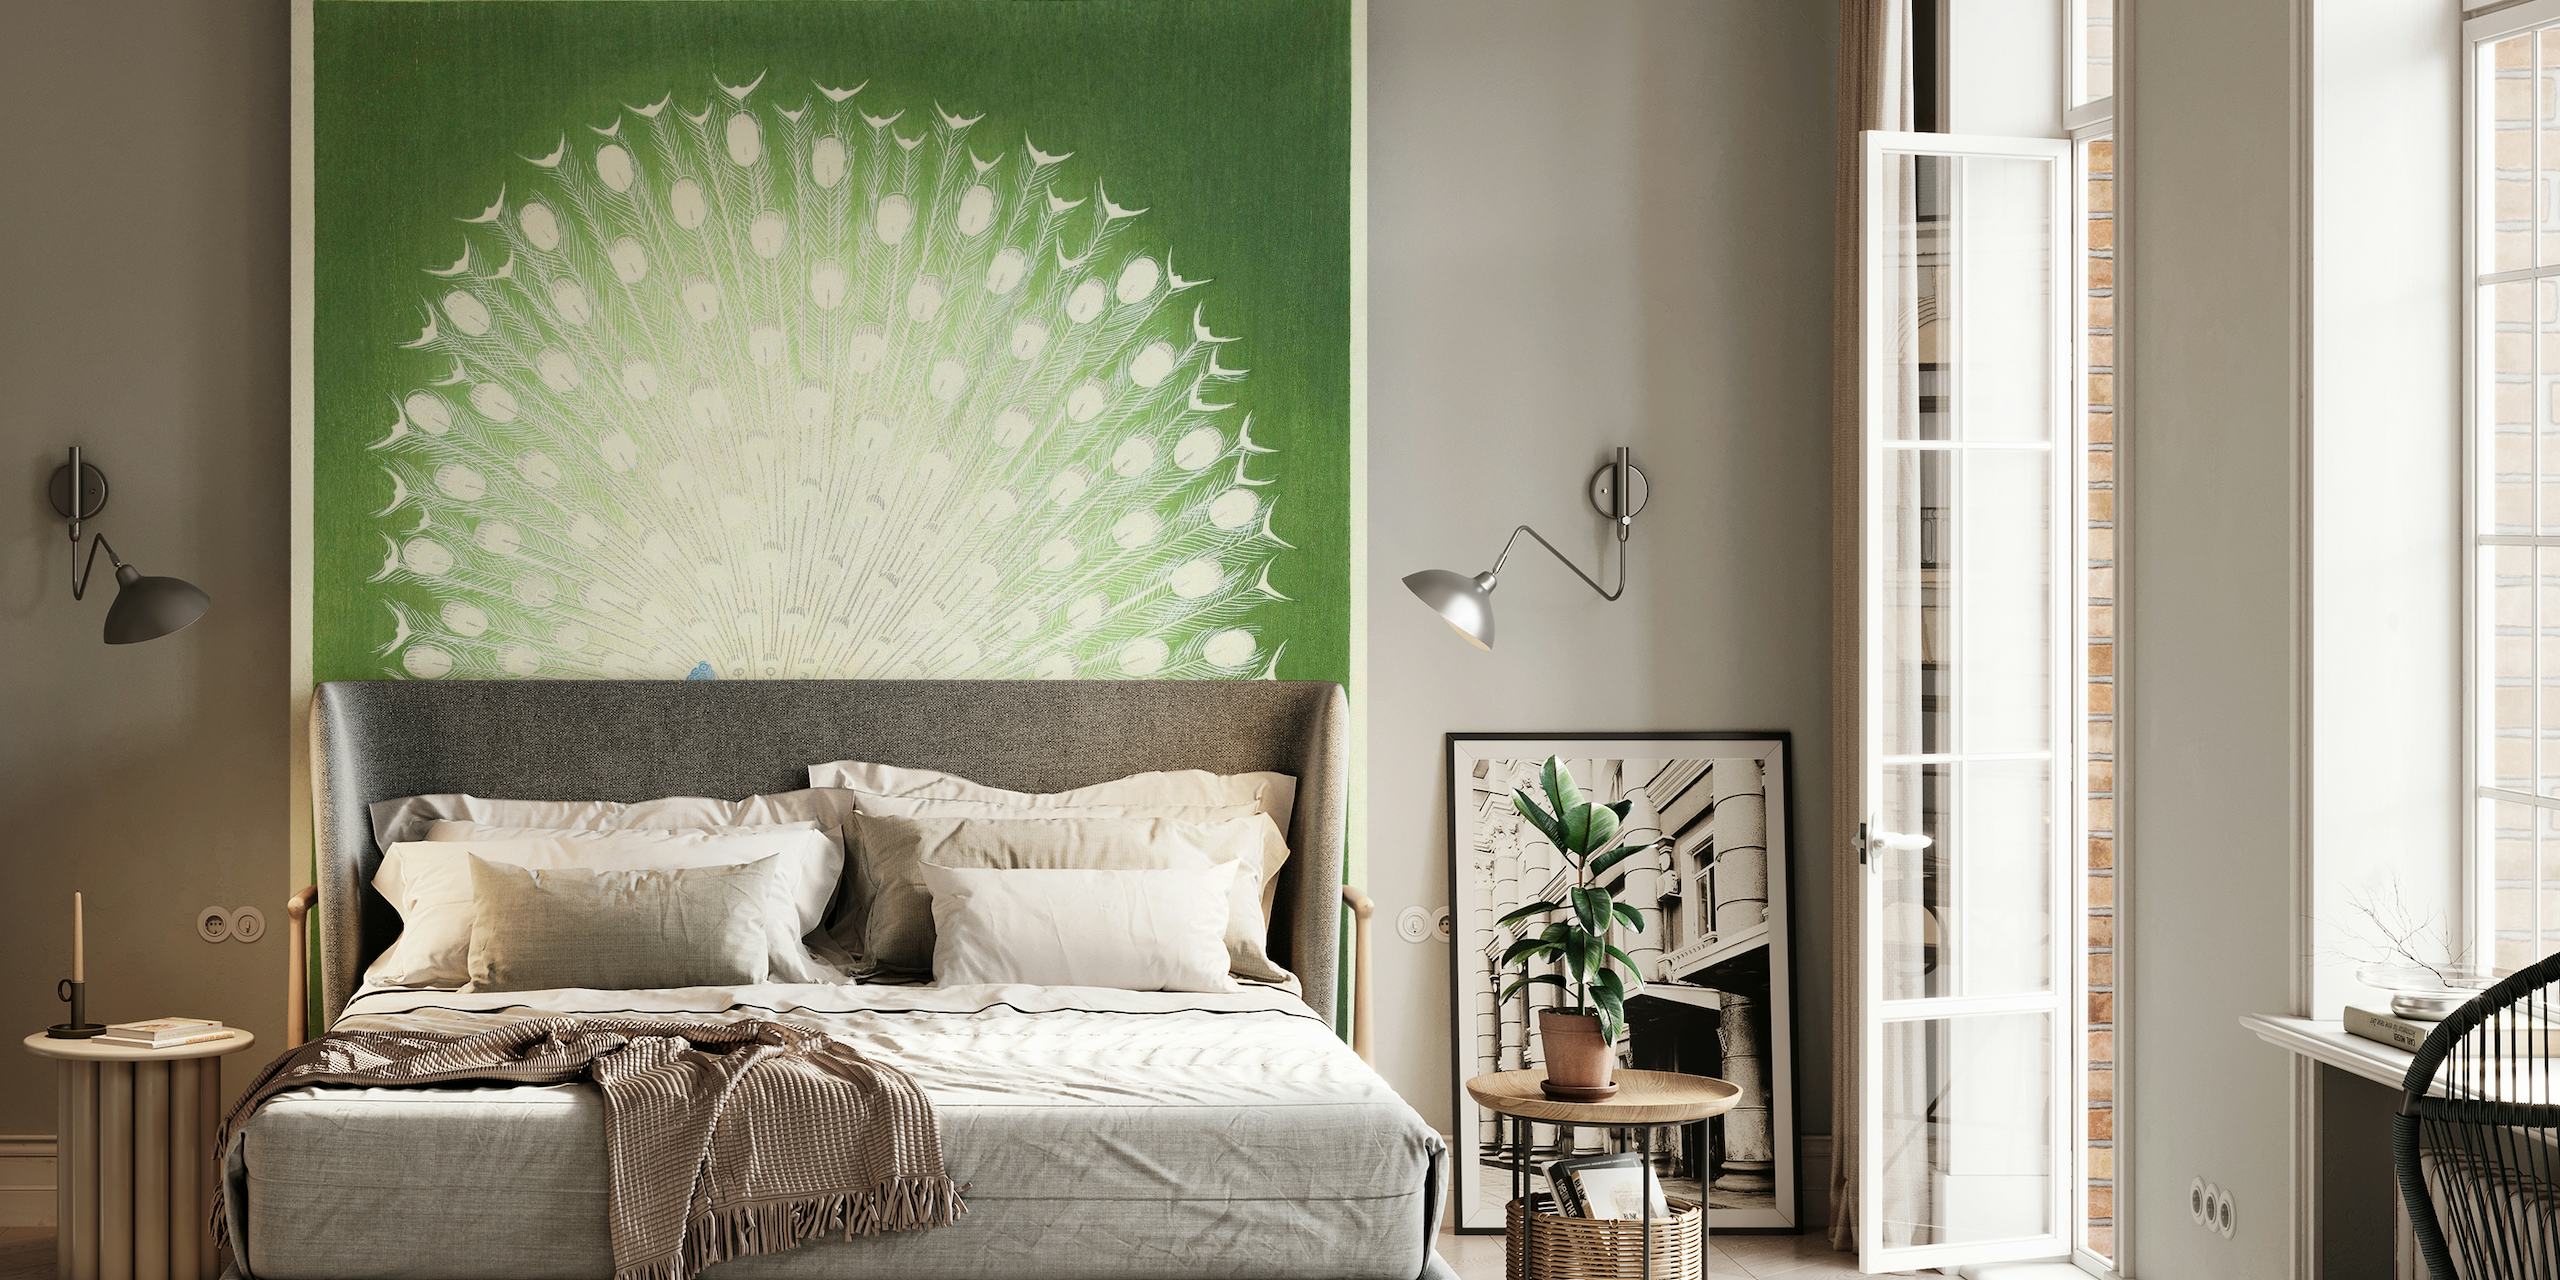 Stunning Peacock Wall Mural with spread feathers in a green environment